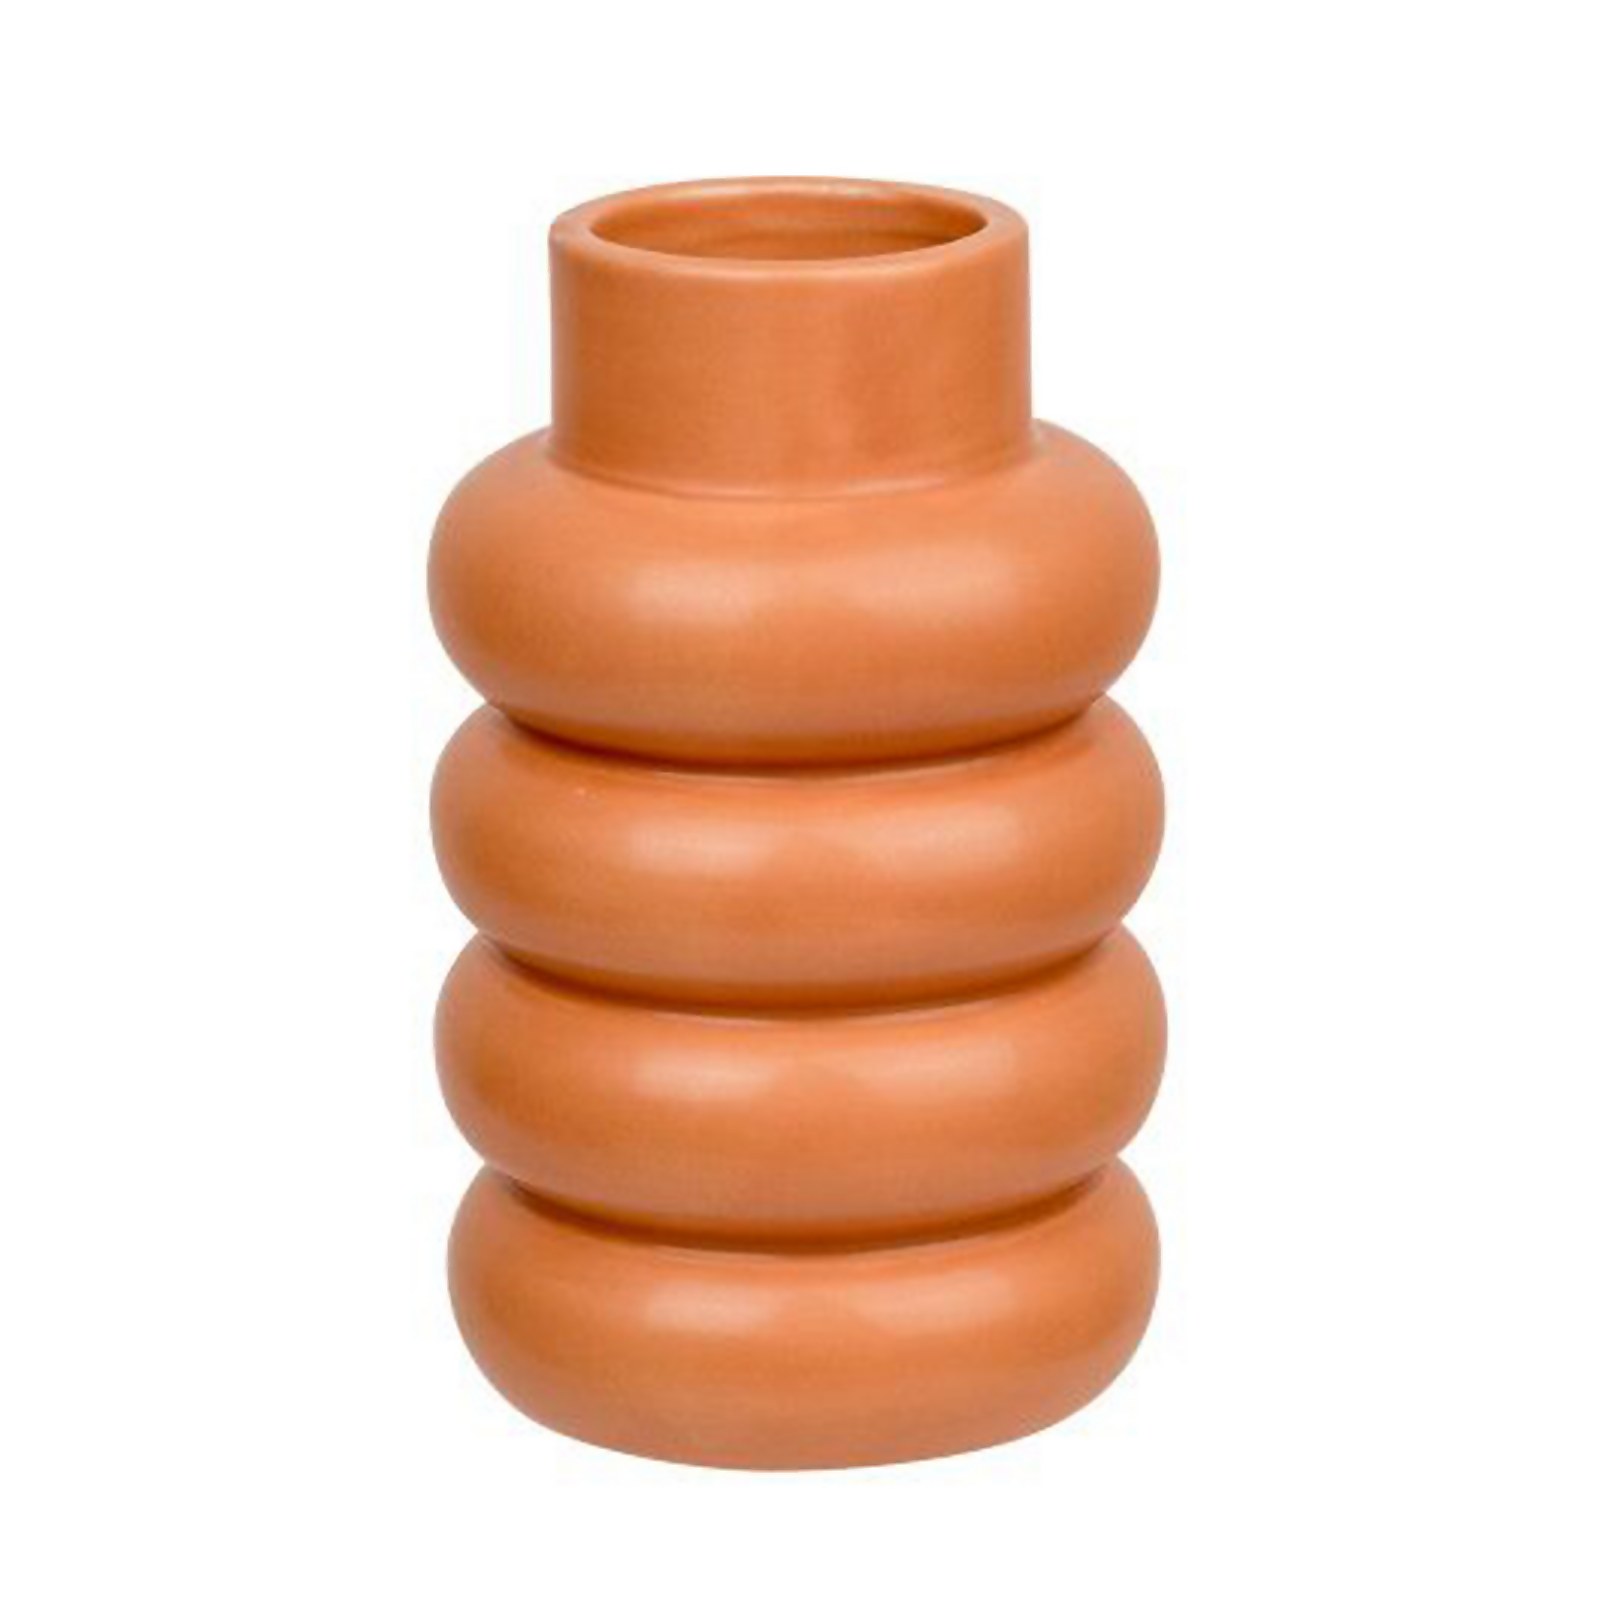 Photo of Rounded Vase - Small